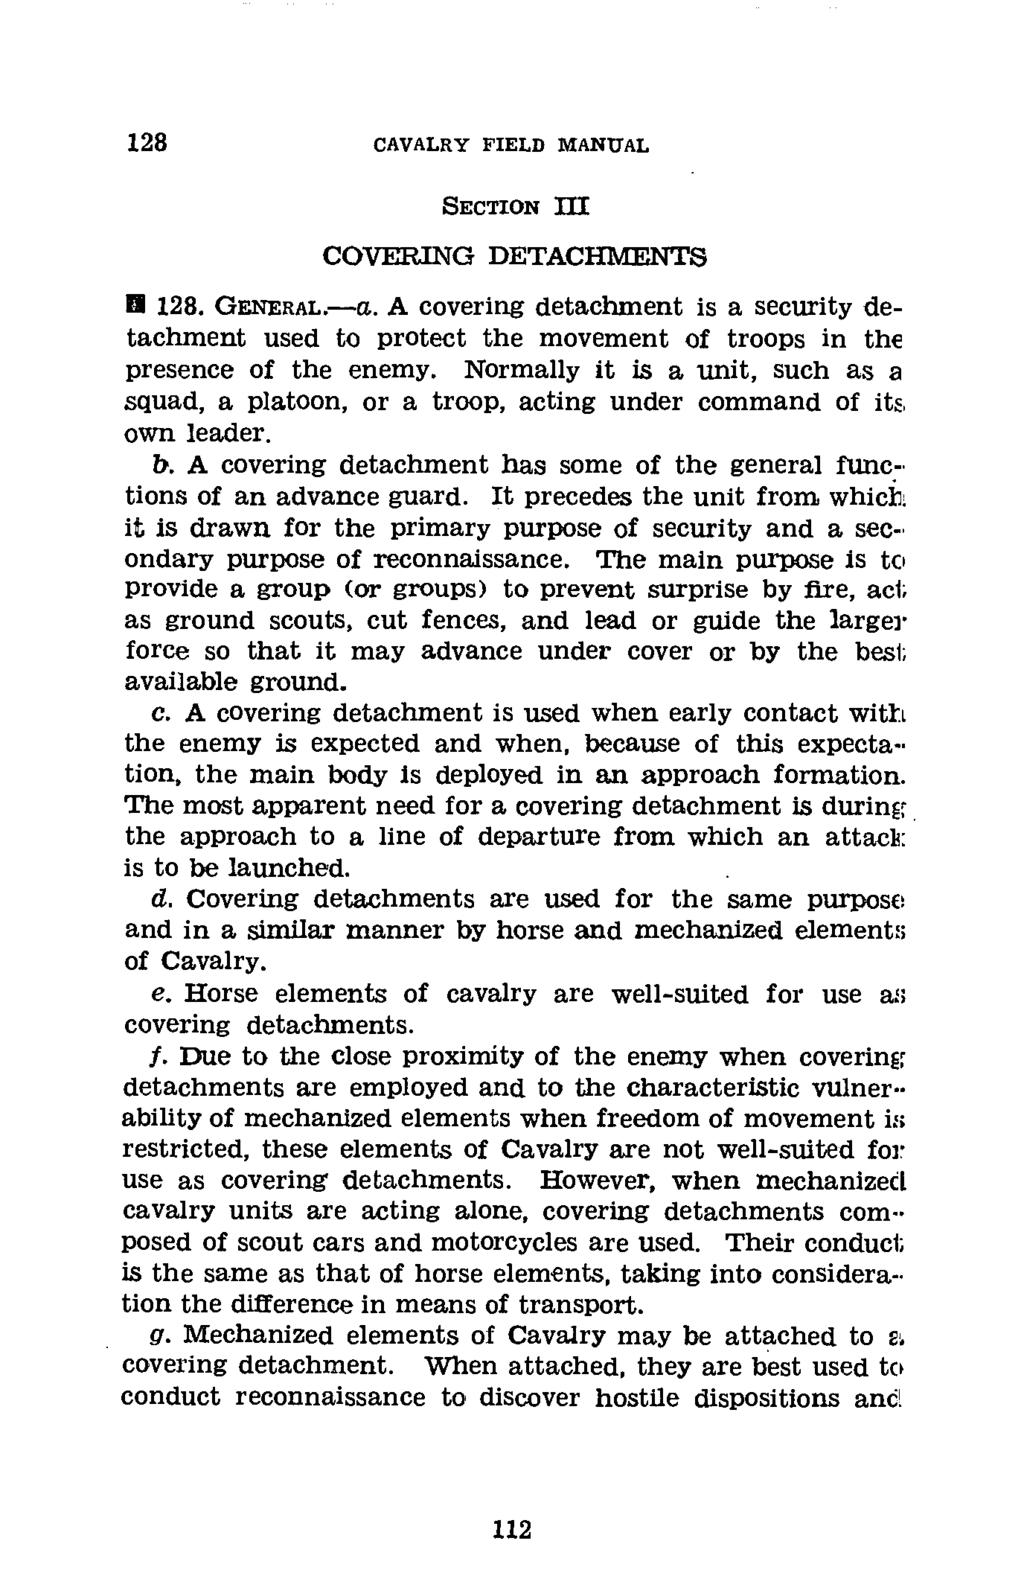 128 CAVALRY FIELD MANUAL SECTION III COVERING DETACHMENTS f 128. GENERAL.-La. A covering detachment is a security detachment used to protect the movement of troops in the presence of the enemy.